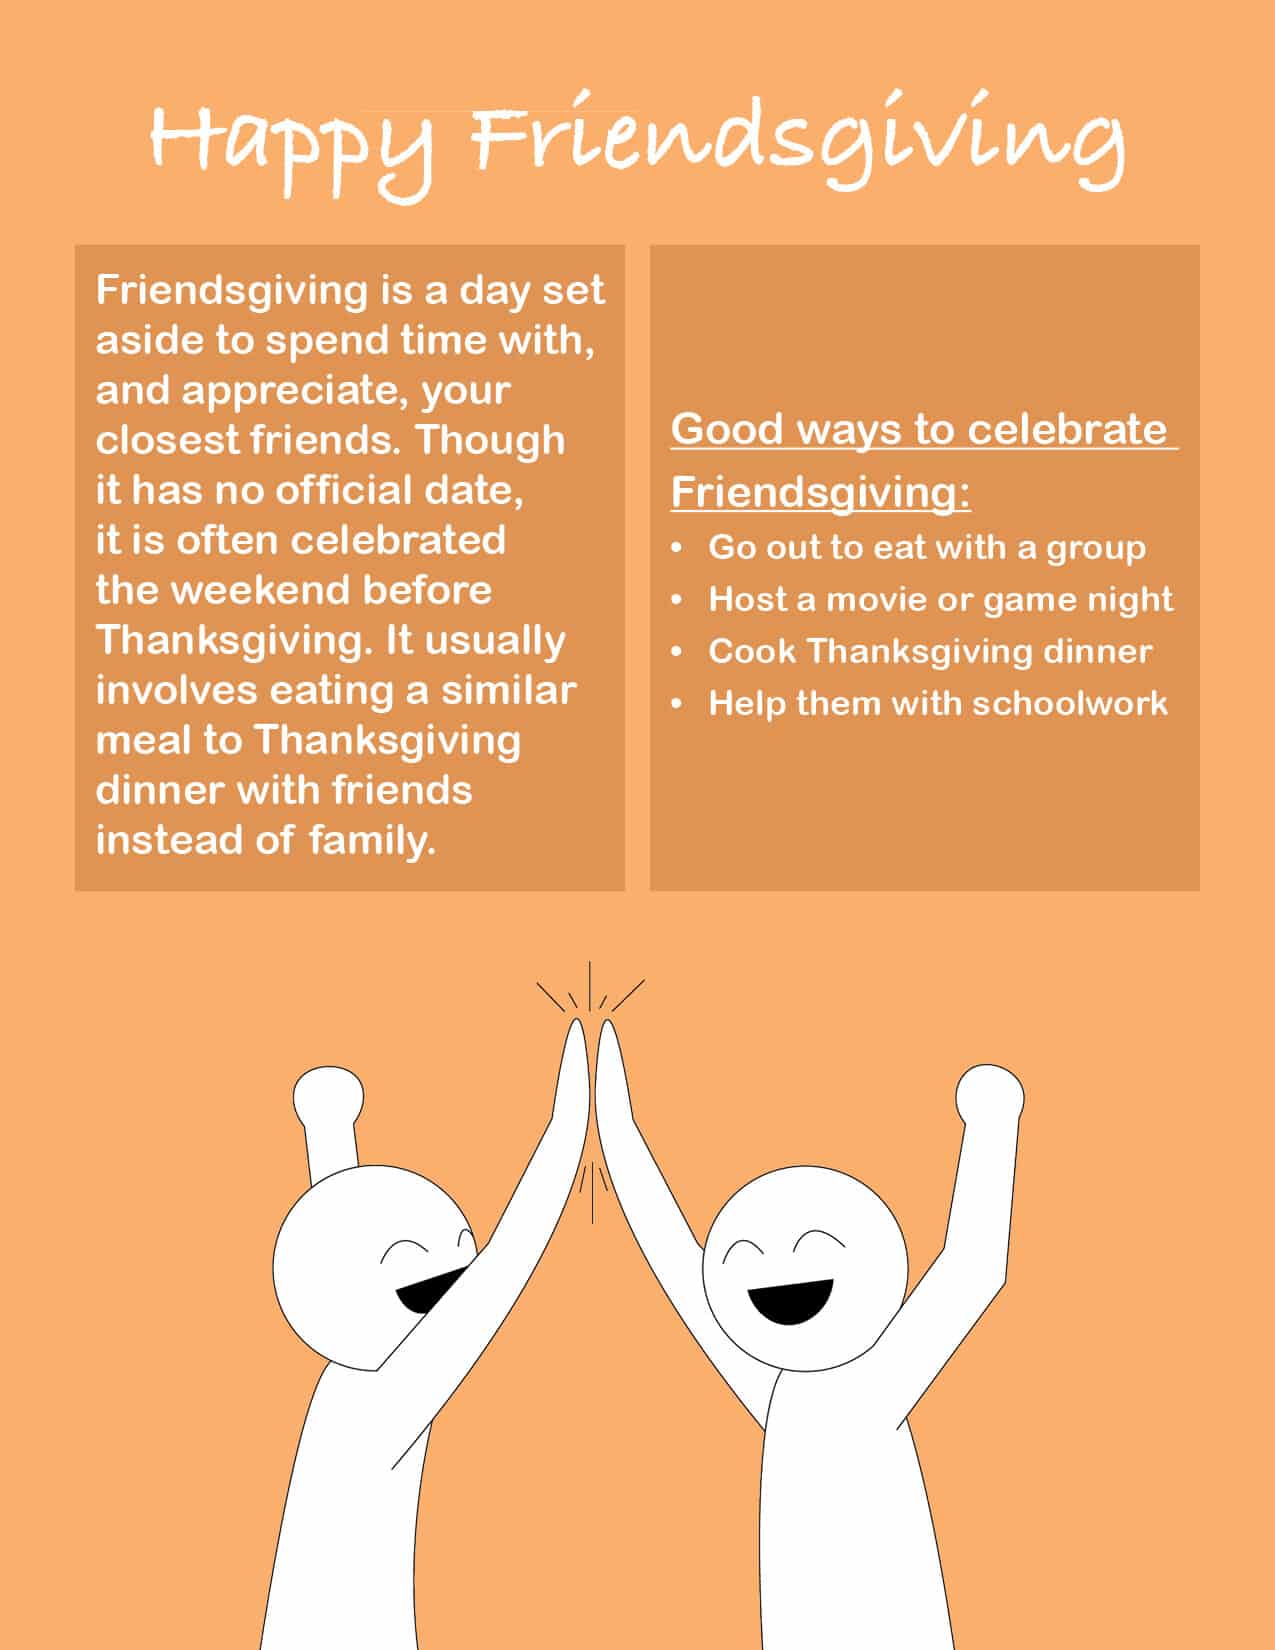 Take some time with your friends this Friendsgiving.Source: realsimple.com